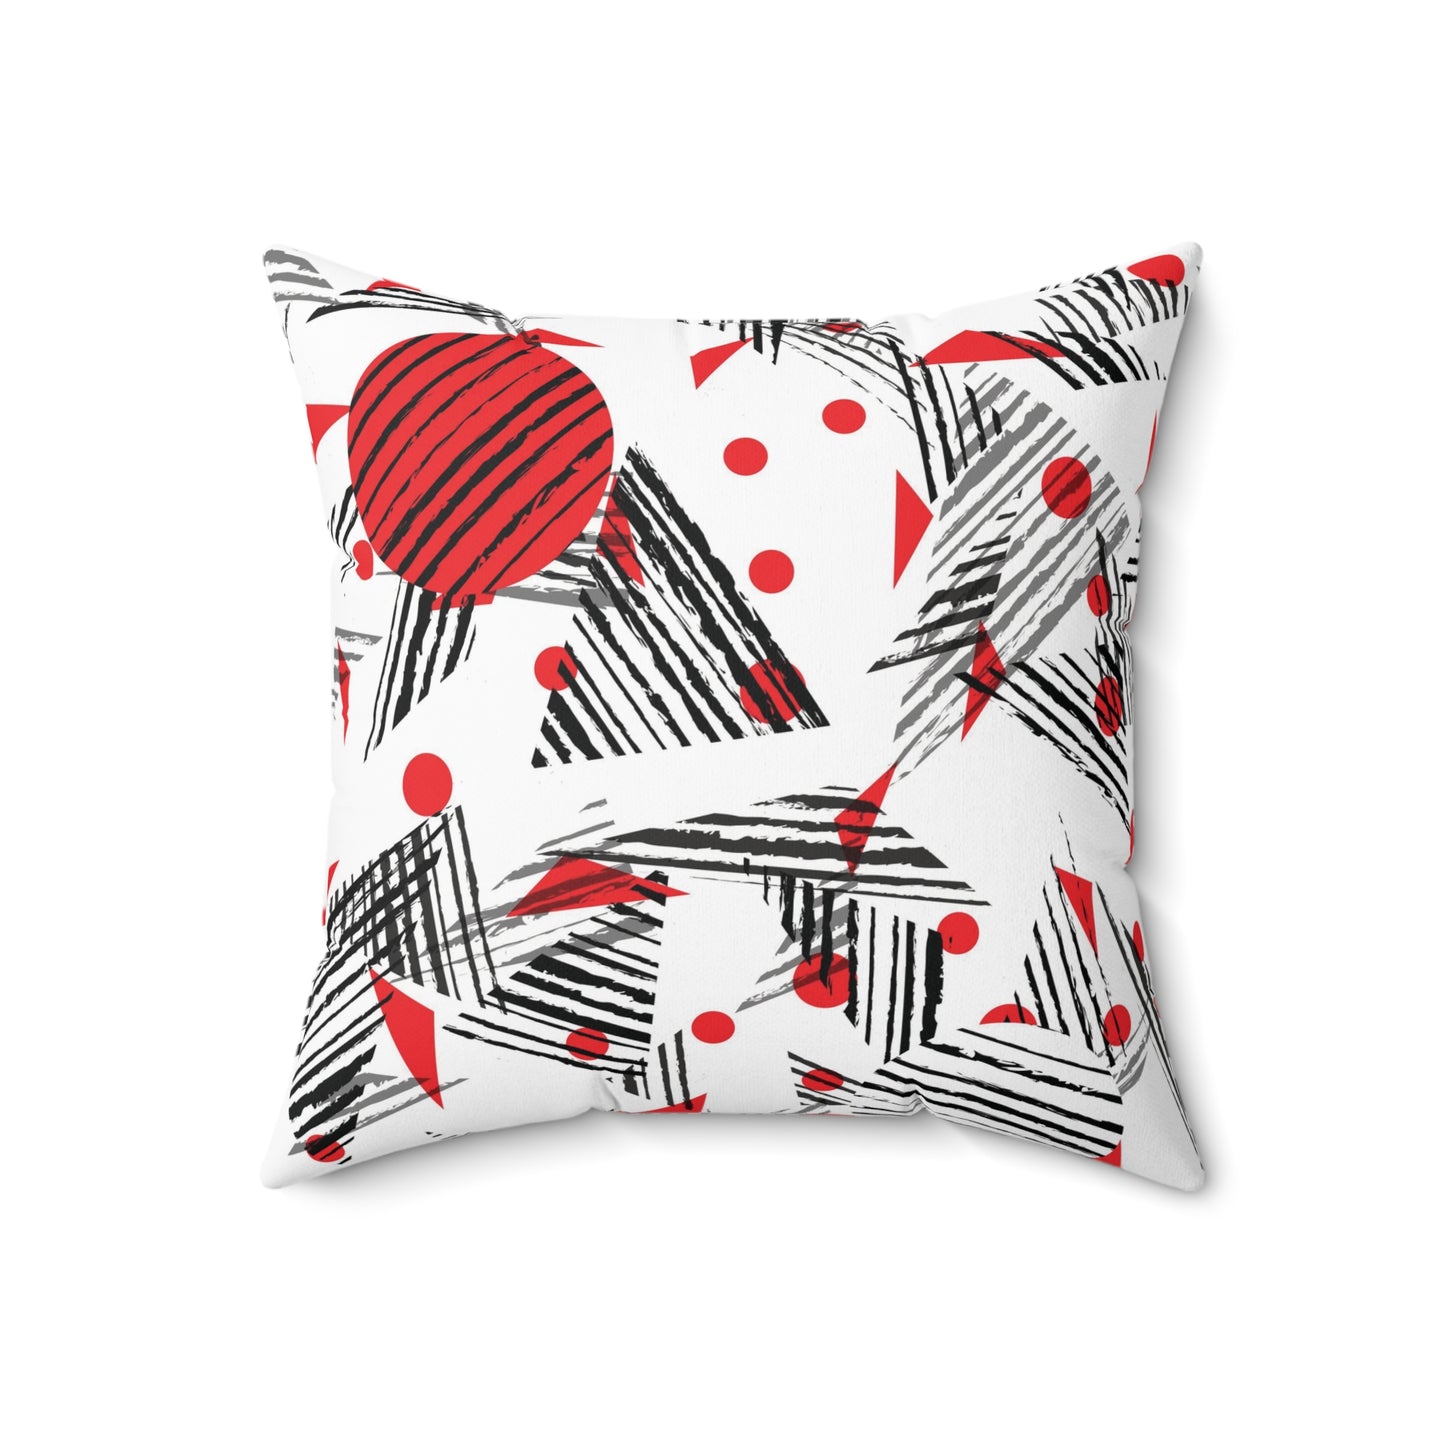 Abstract Japanese Pattern Design Square Pillow